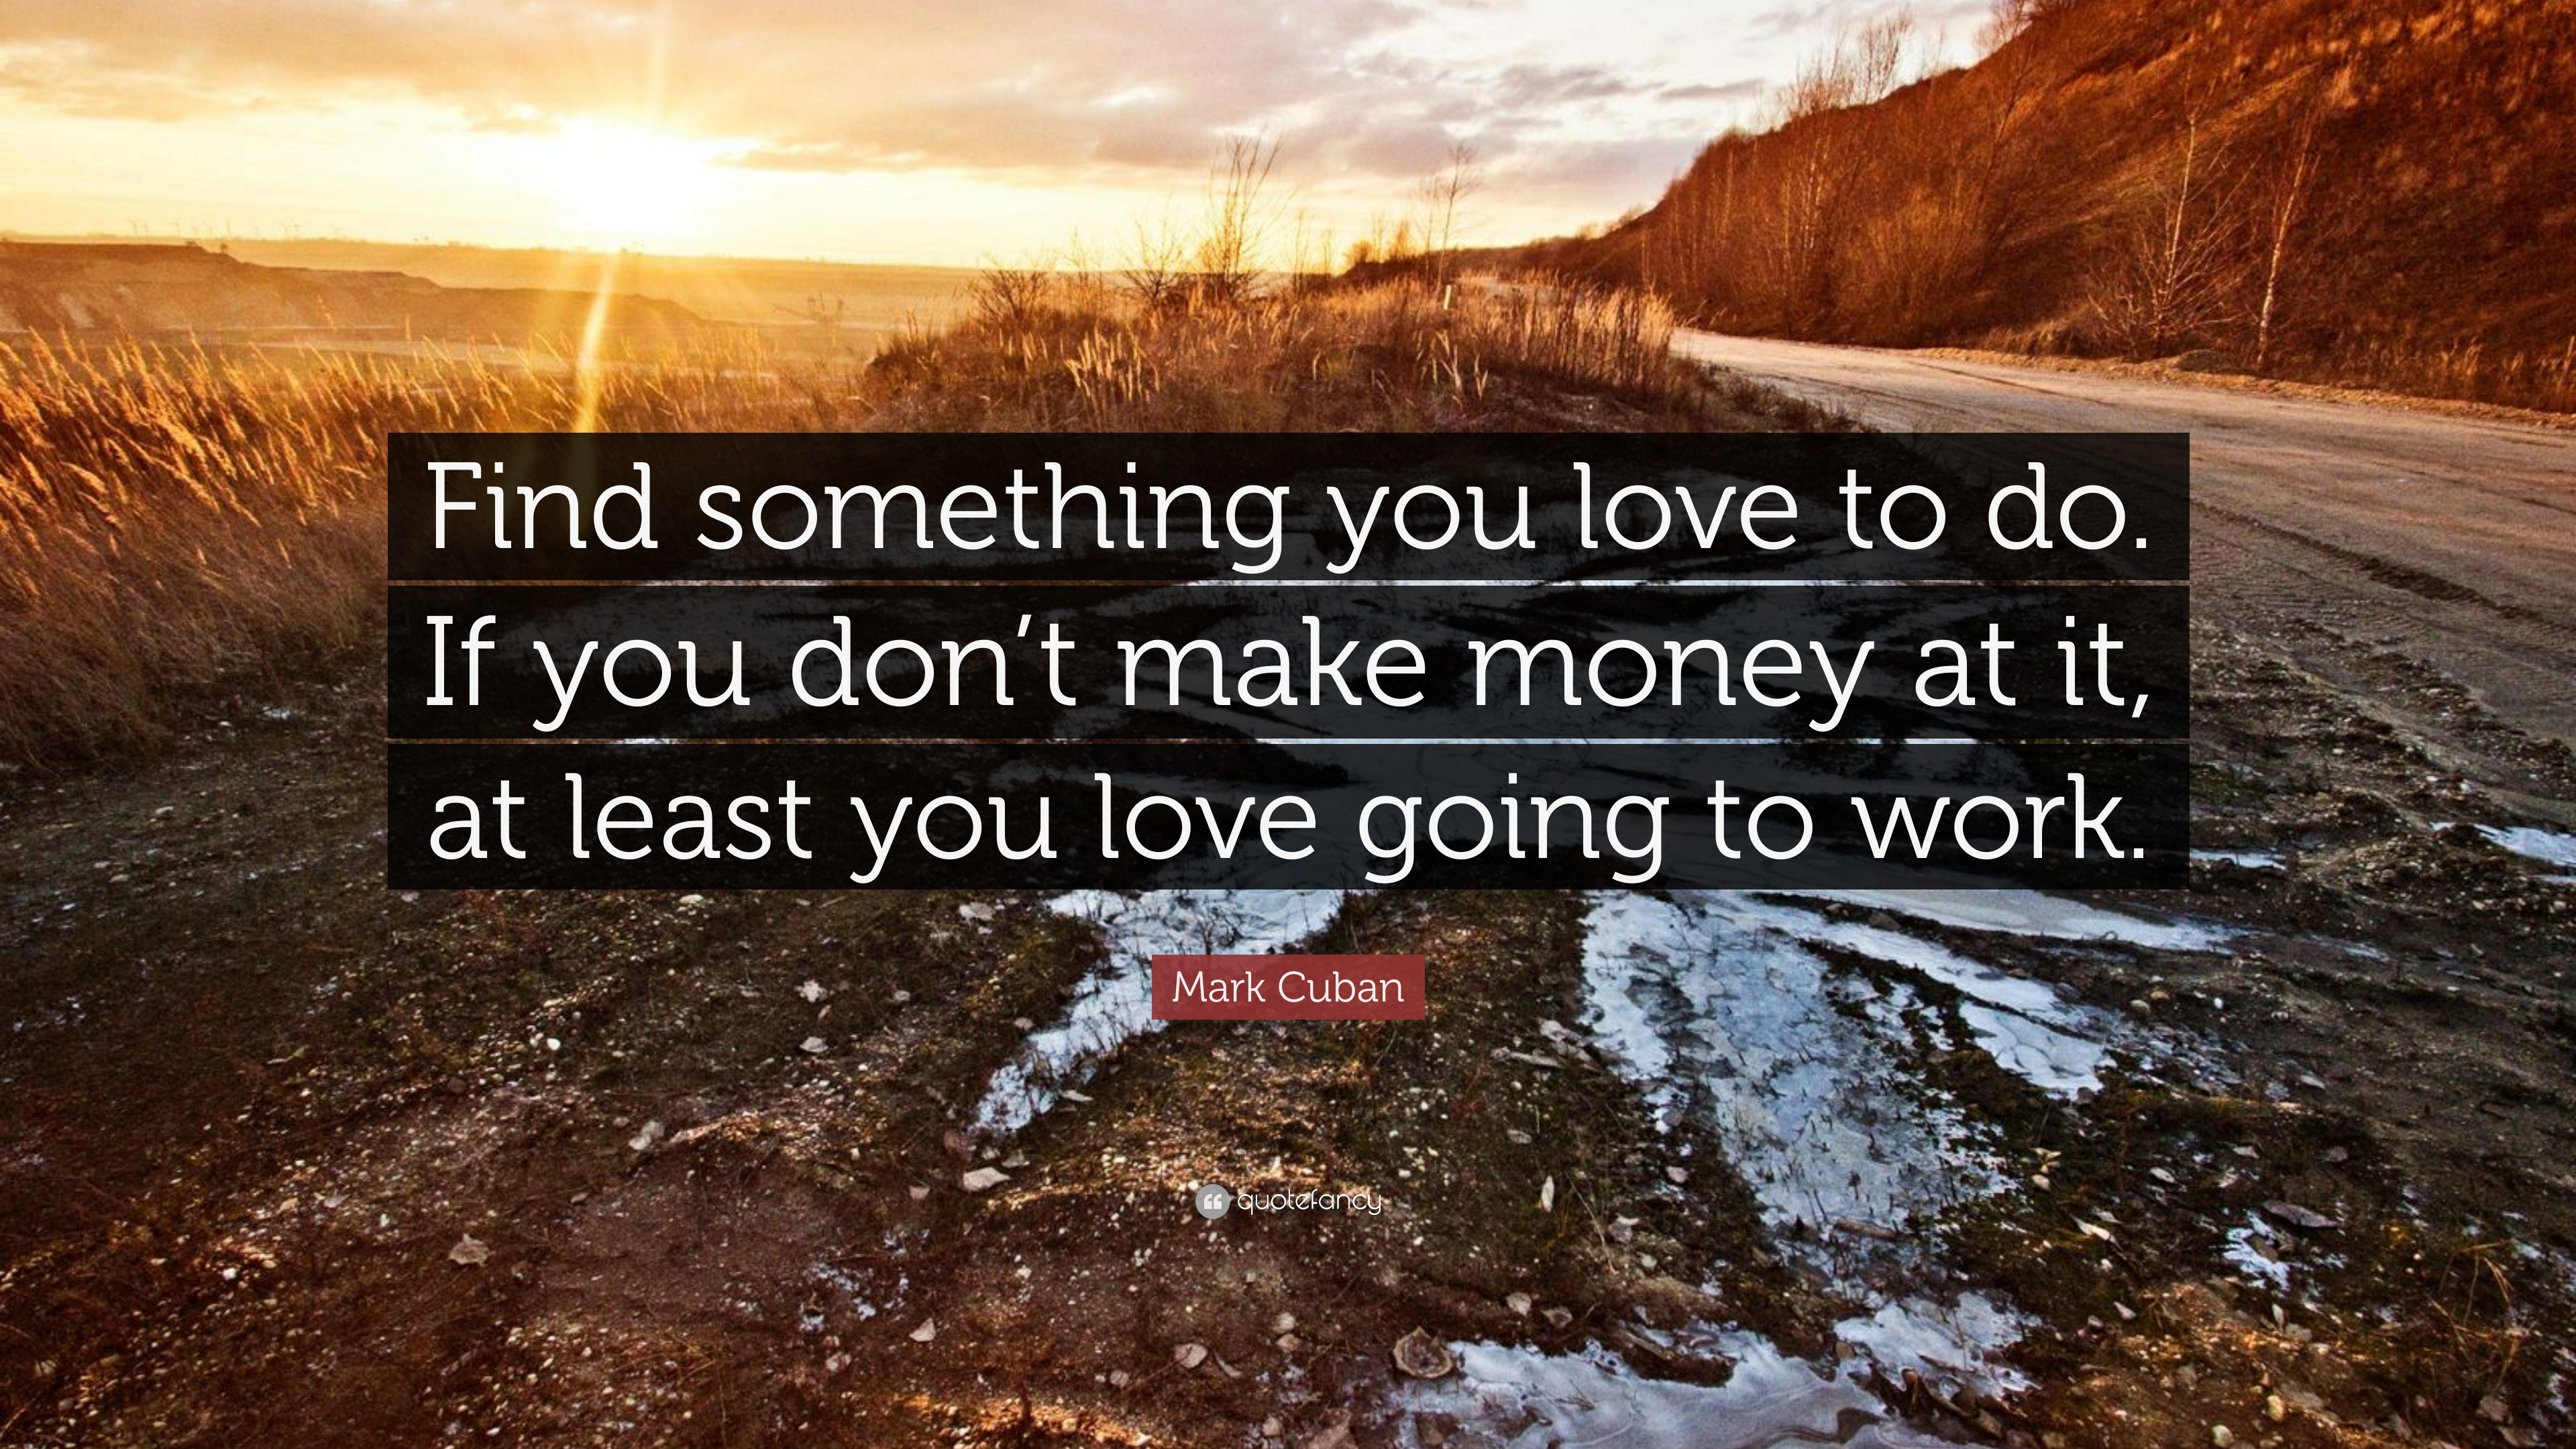 Mark Cuban Quote: “Find something you love to do. If you don’t make ...